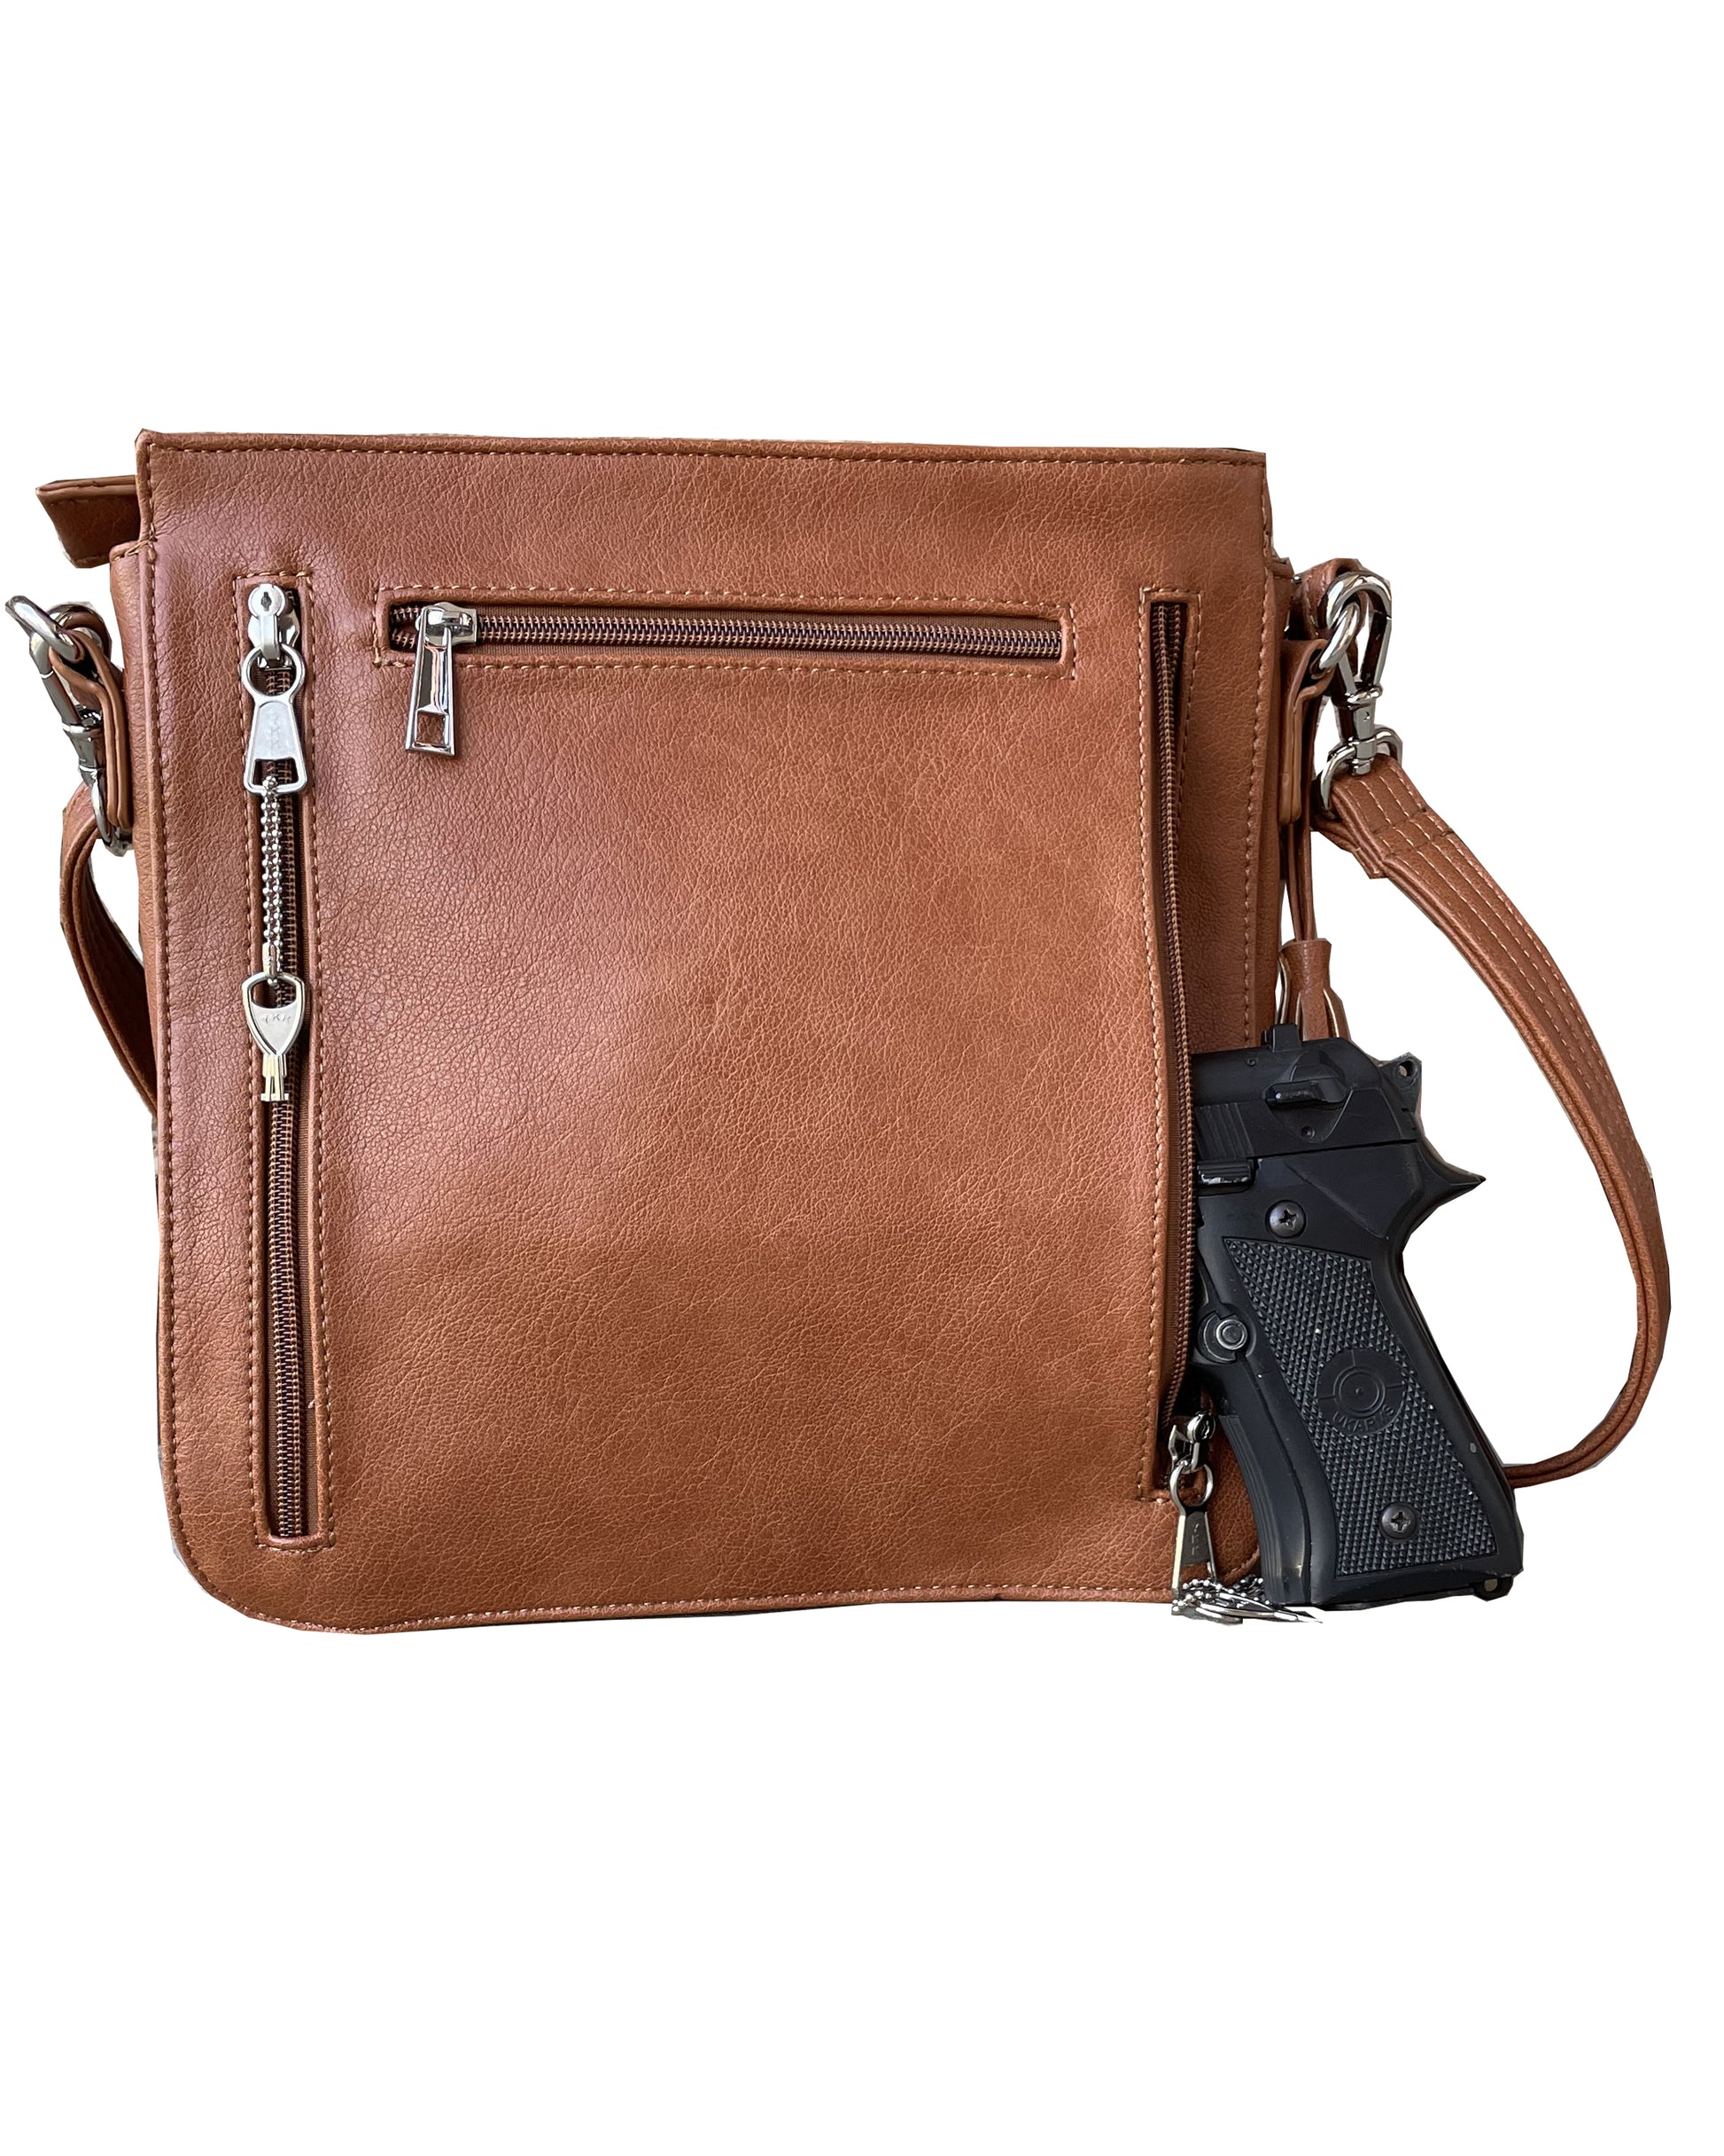 New Leather Side Laced Lockable Concealed Carry Crossbody Satchel Purse - Hiding Hilda, LLC